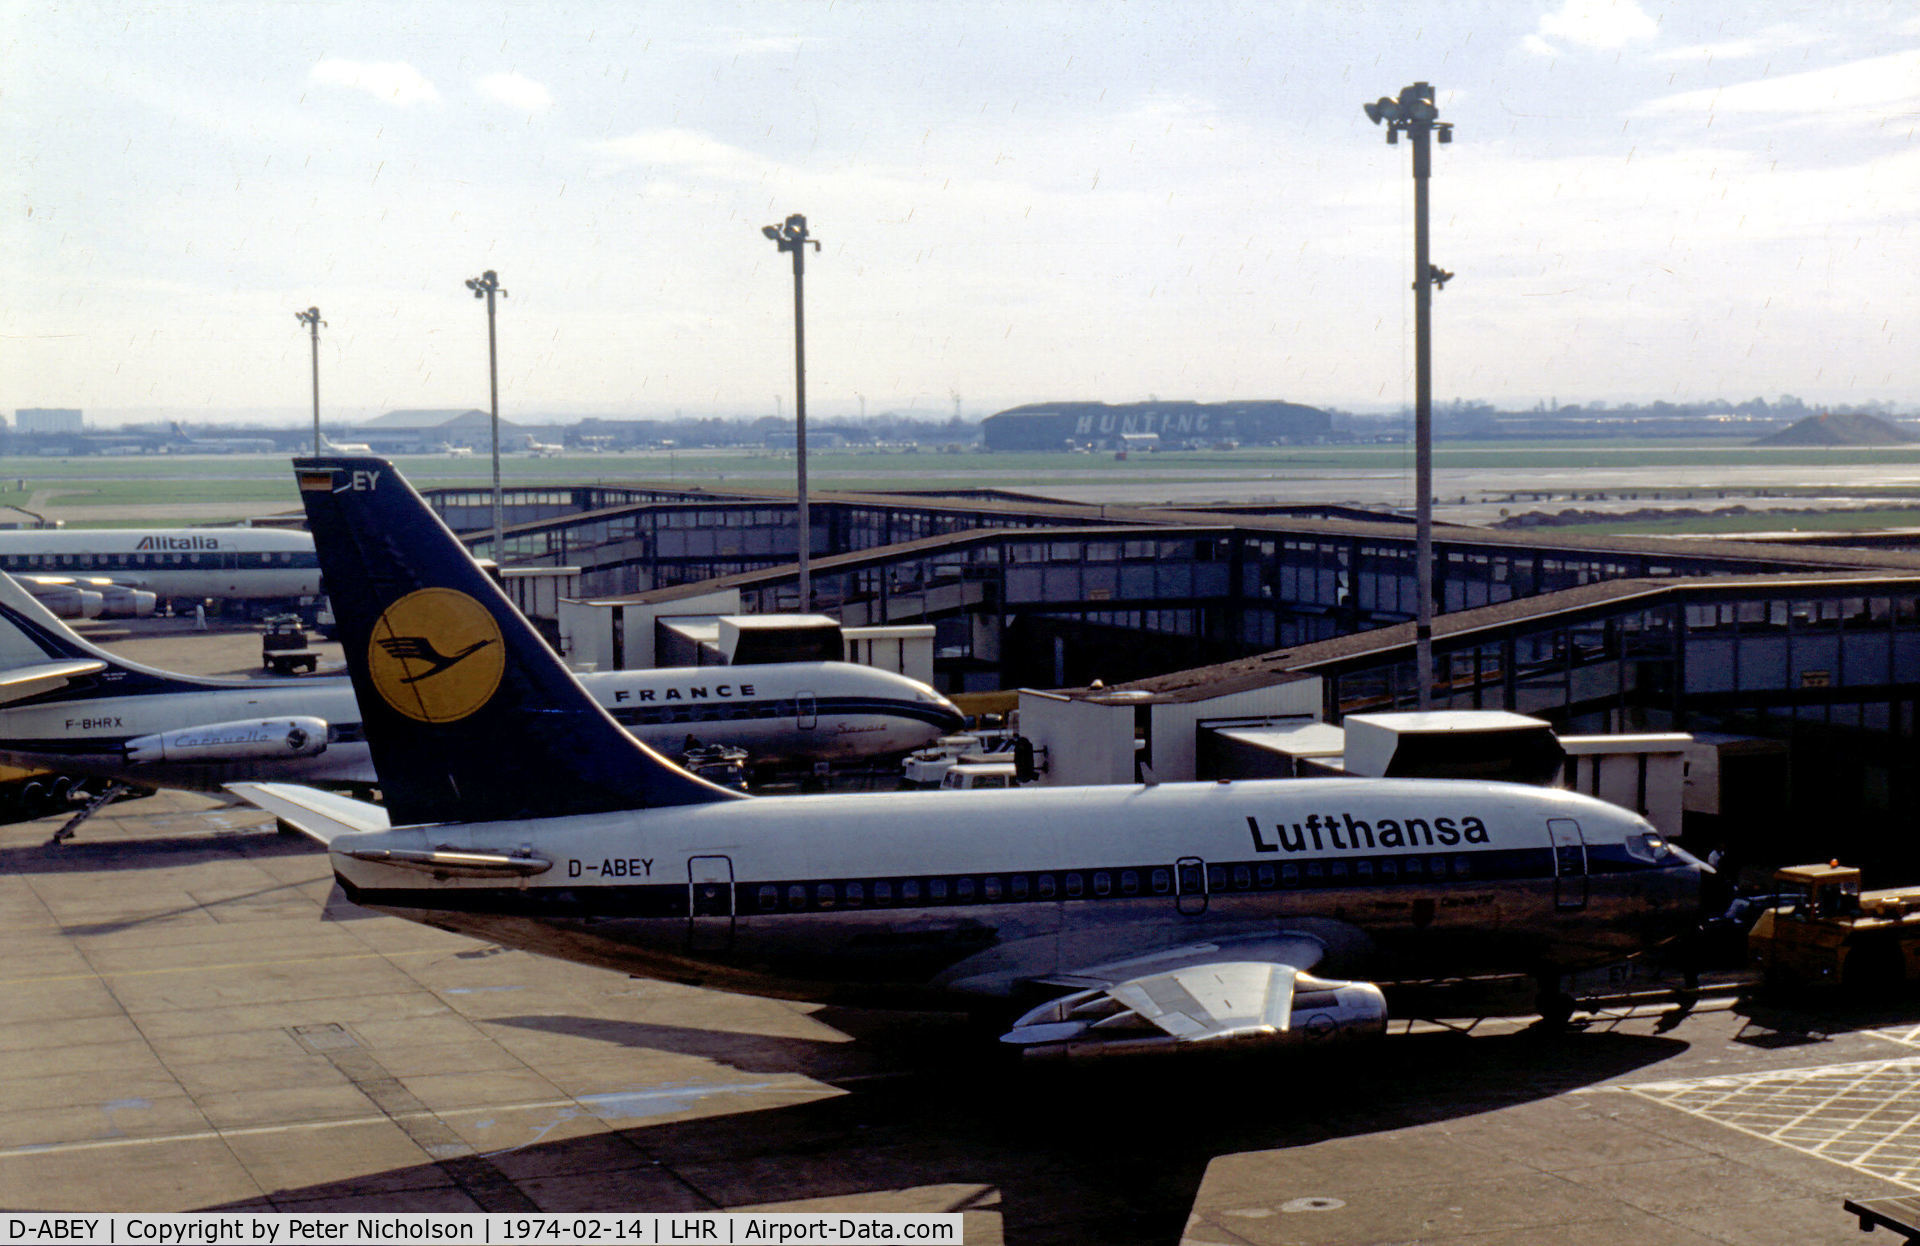 D-ABEY, 1969 Boeing 737-130 C/N 19794, Boeing 737-130, named Worms, of Lufthansa at the terminal at Heathrow in February 1974. This aircraft was later hijacked at Fiumicino Airport, Rome on December 17, 1974.